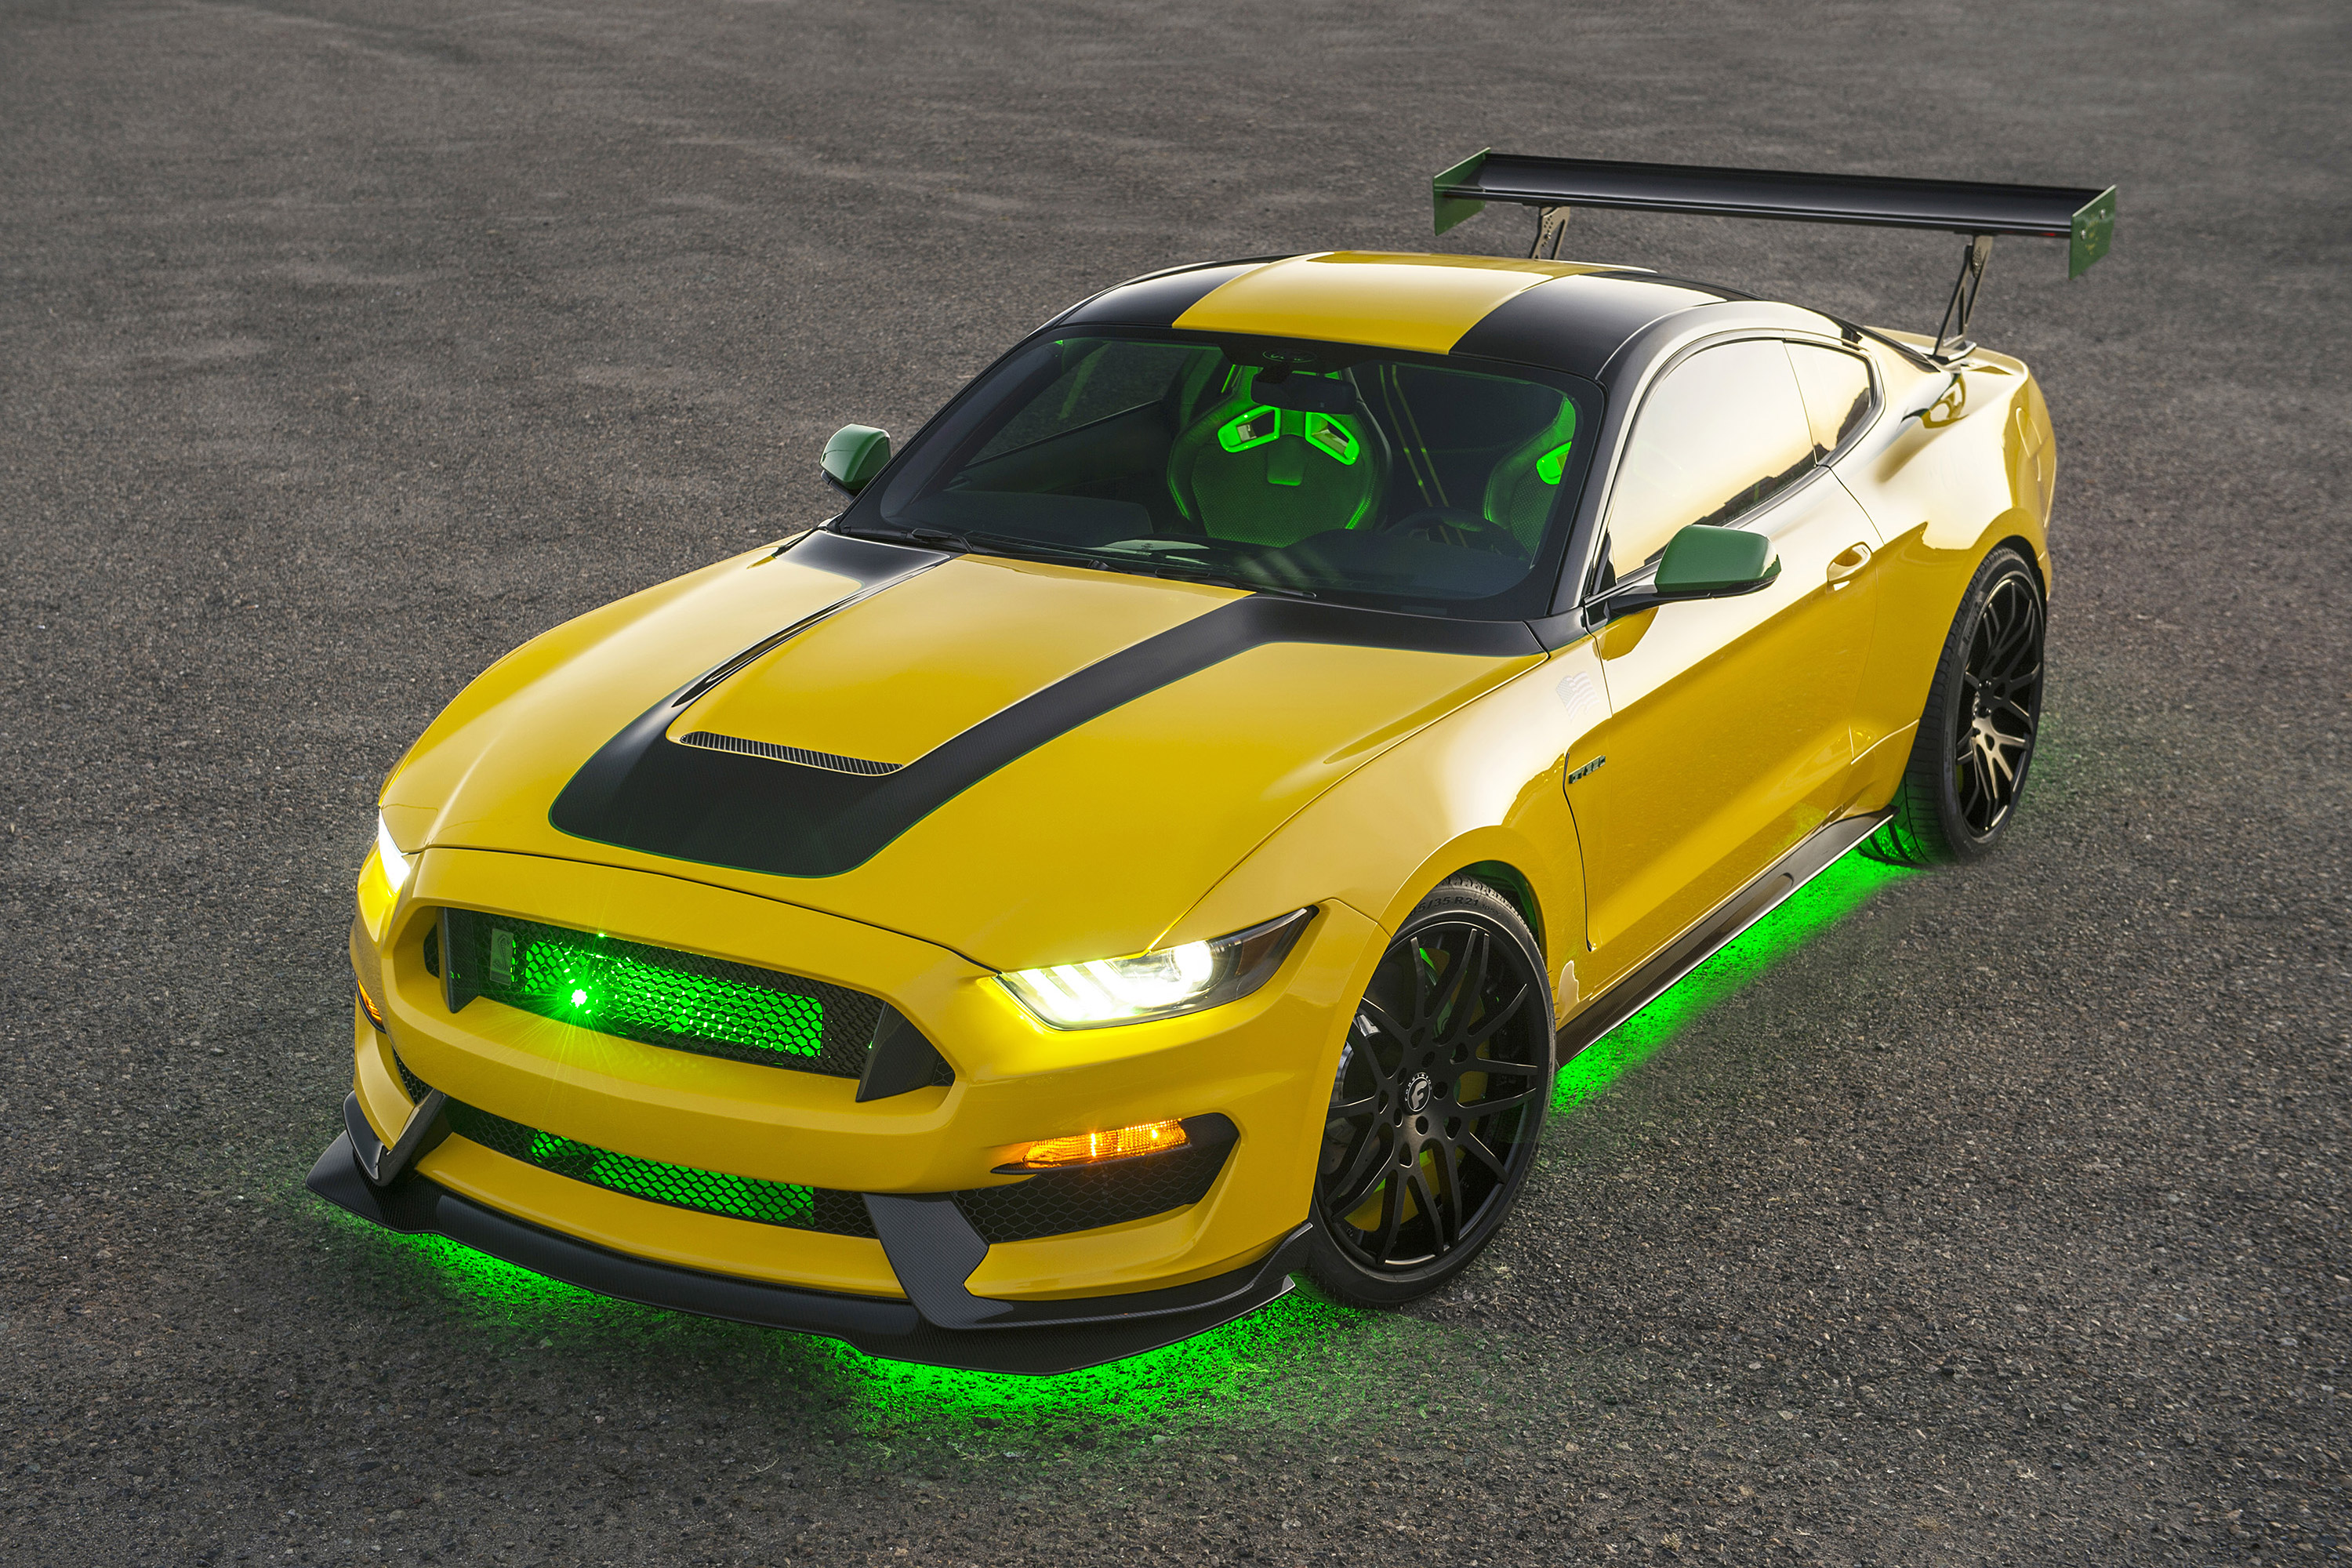  2016 Ford Shelby Mustang GT350 \'Ole Yeller\' Wallpaper.